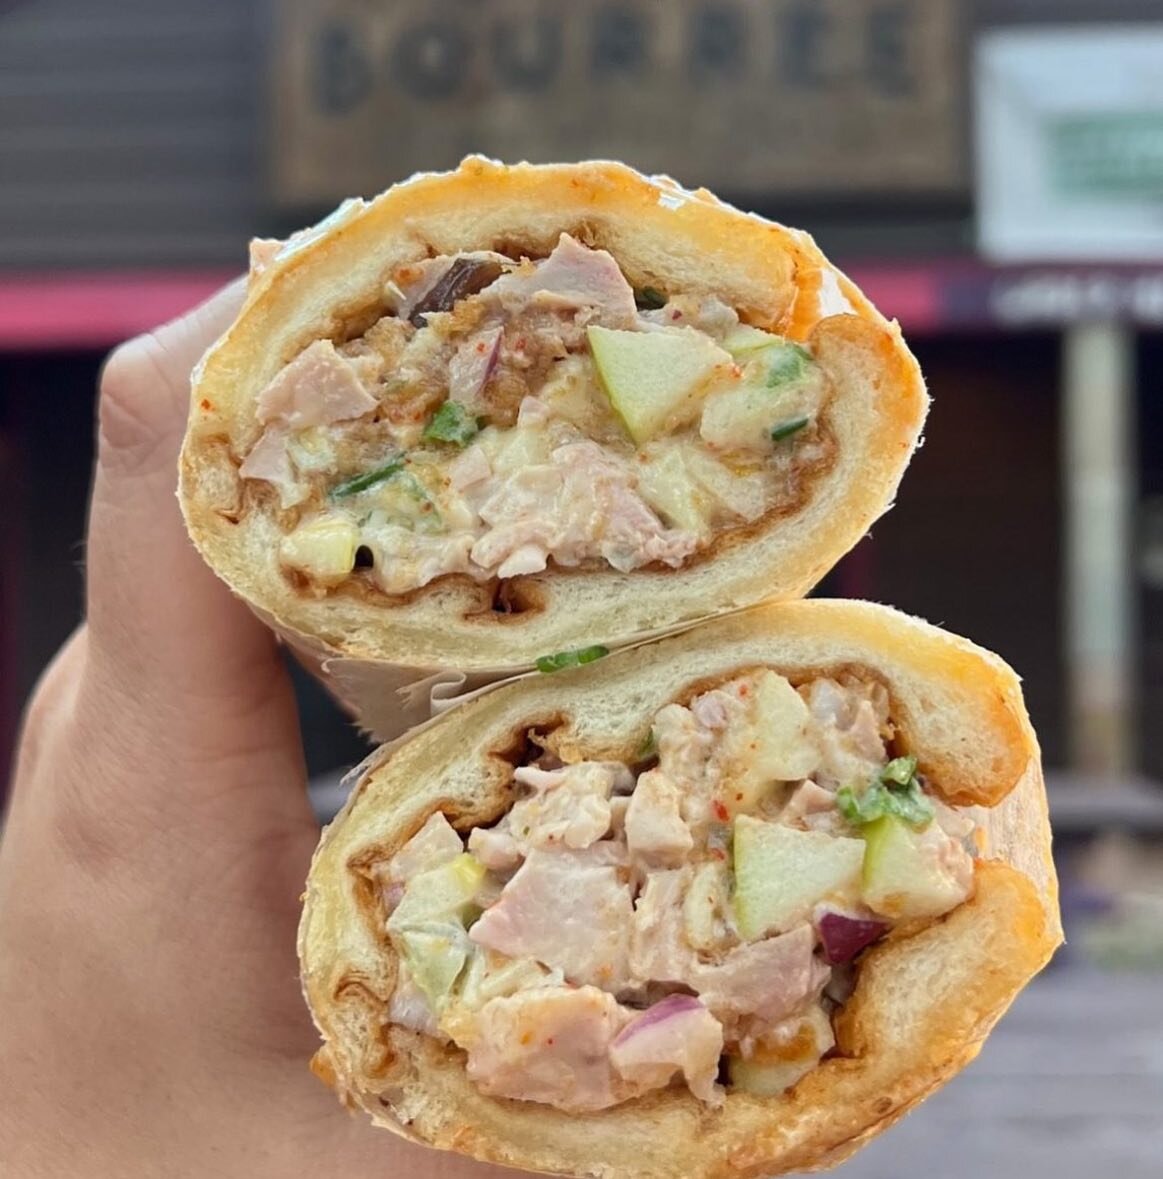 ✨NEW✨ On the menu: Our chopped smoked chicken salad sandwich is rolled up in a @dpbakerynola pistollete 🤤

Chicken salad is fried chicken, green apples, red onions, green onions, and so much more. Come try it for yourself! 🙌

📸: @aintthatphancy